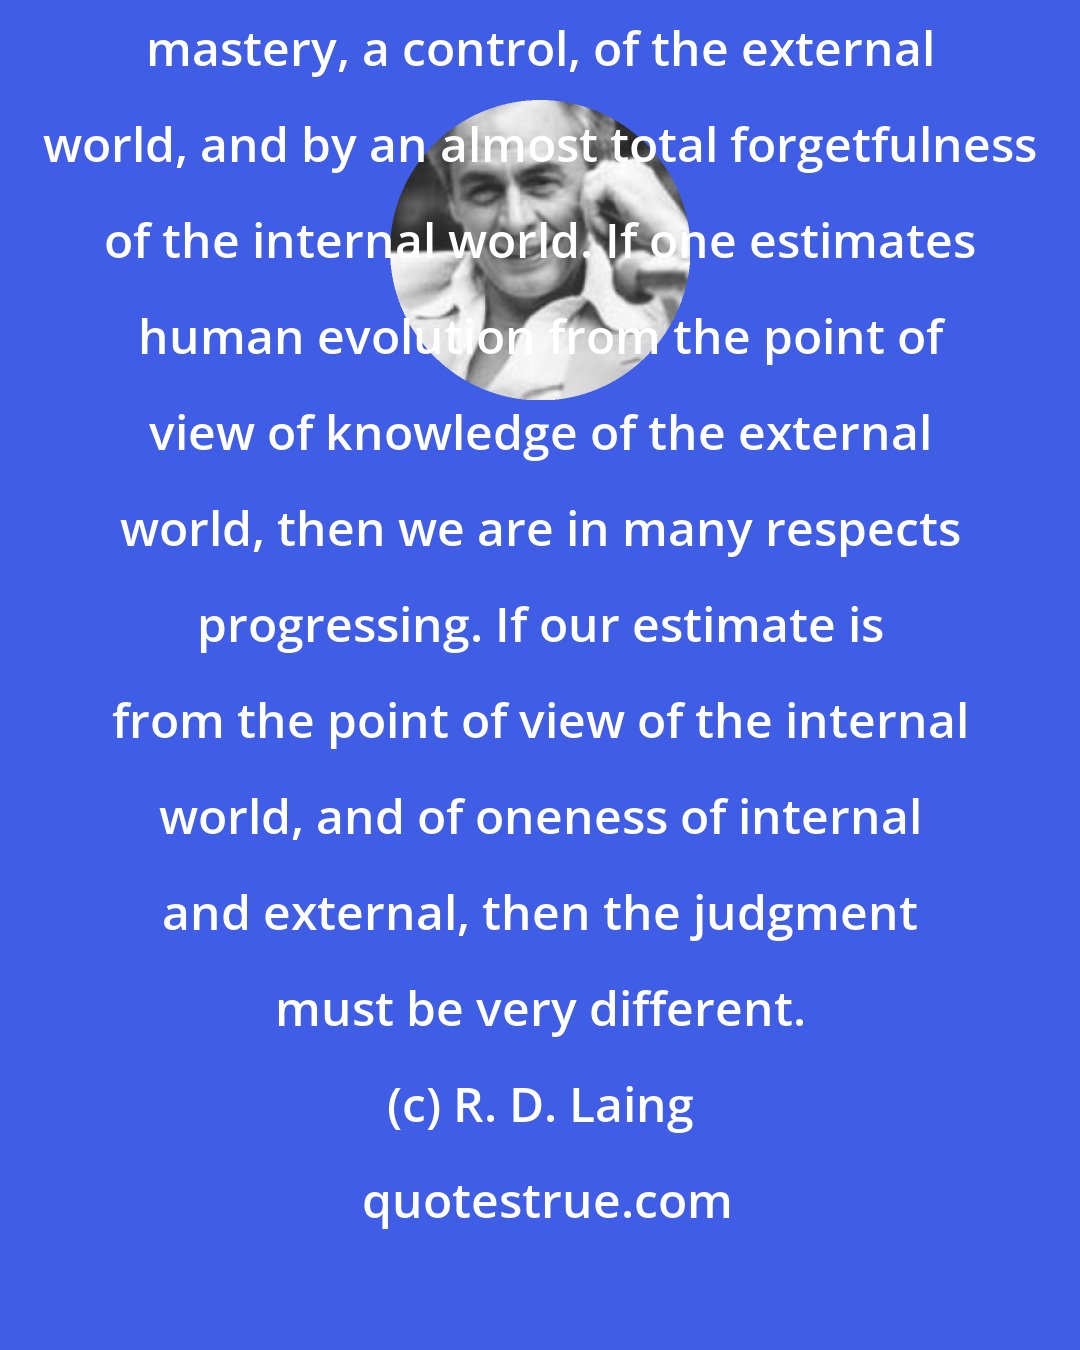 R. D. Laing: Our time has been distinguished, more than by anything else, by a mastery, a control, of the external world, and by an almost total forgetfulness of the internal world. If one estimates human evolution from the point of view of knowledge of the external world, then we are in many respects progressing. If our estimate is from the point of view of the internal world, and of oneness of internal and external, then the judgment must be very different.